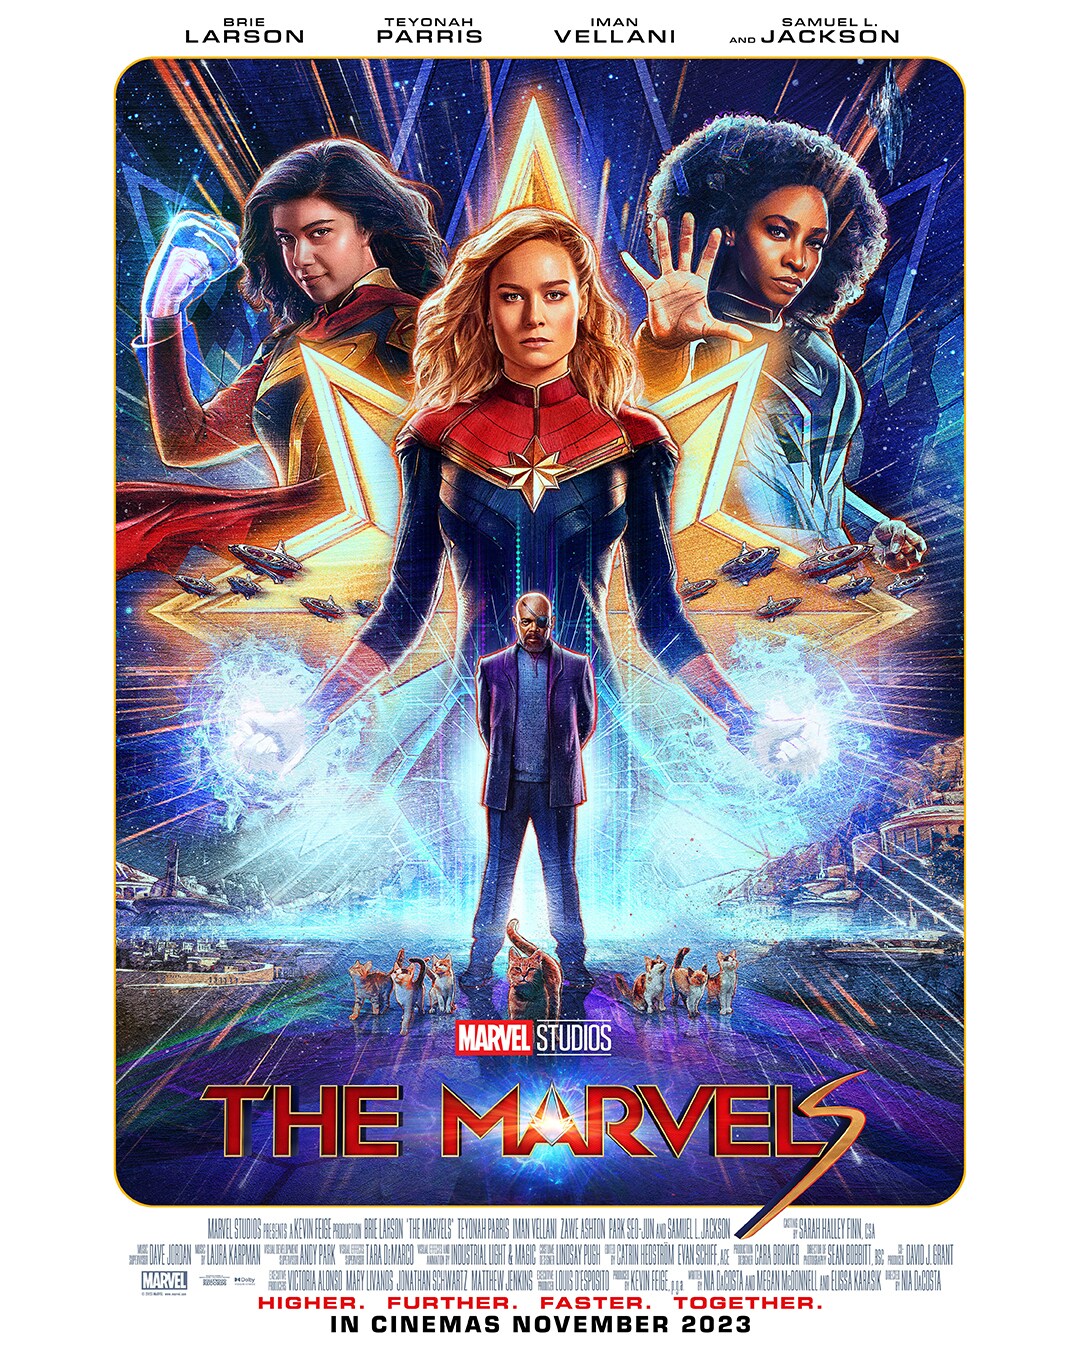 The Marvels Poster.